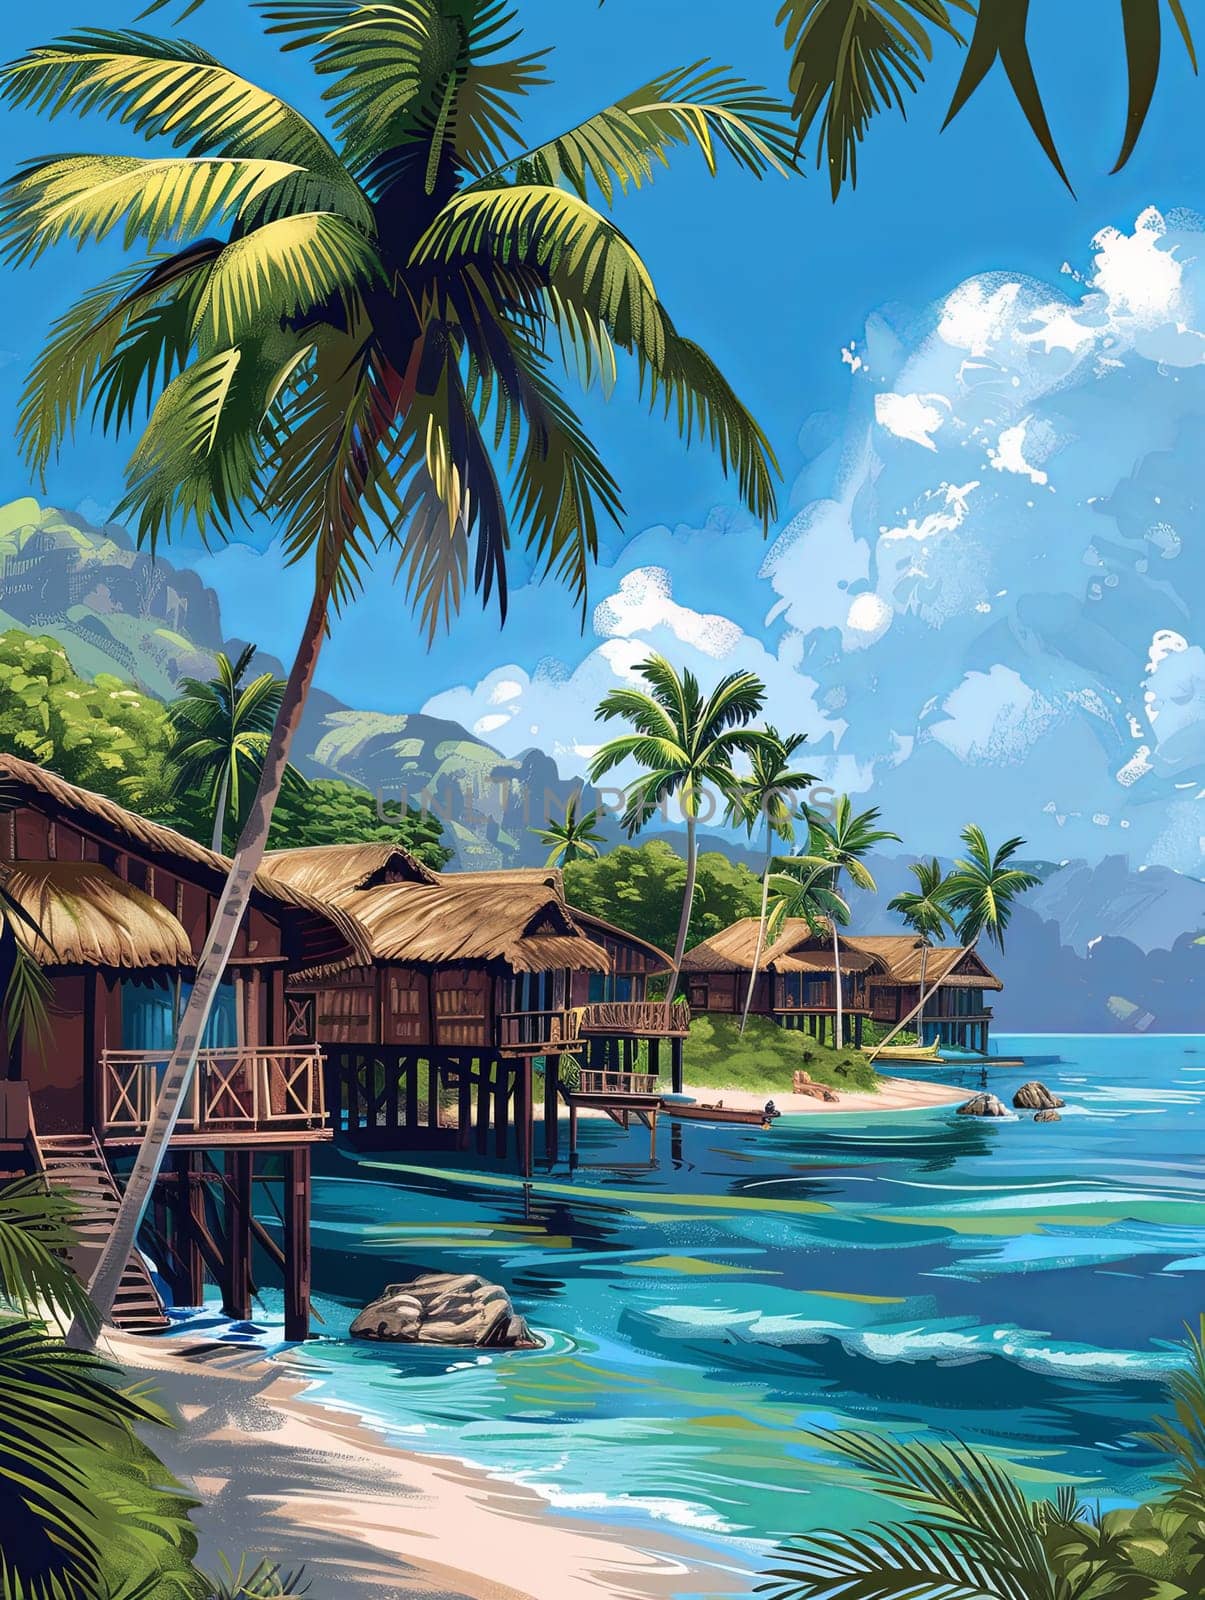 A painting depicting a tropical beach with palm trees and a serene sea under a clear blue sky.